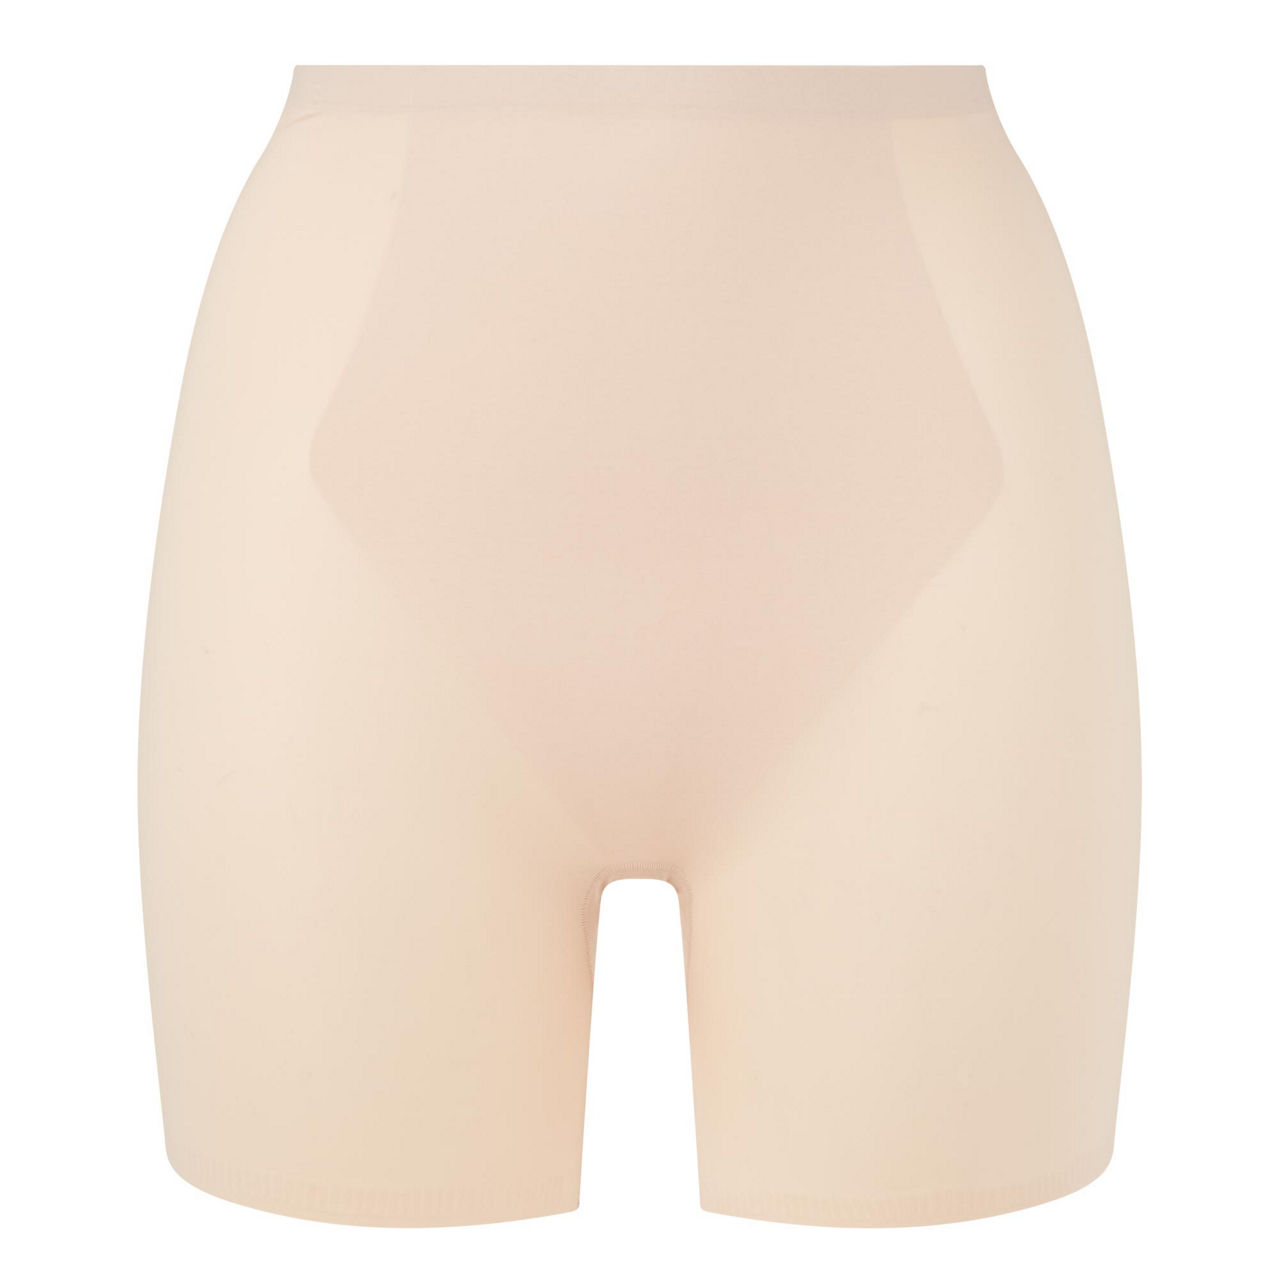 Spanx Smooth It Extended Length Mid-Thigh Short Set of 2